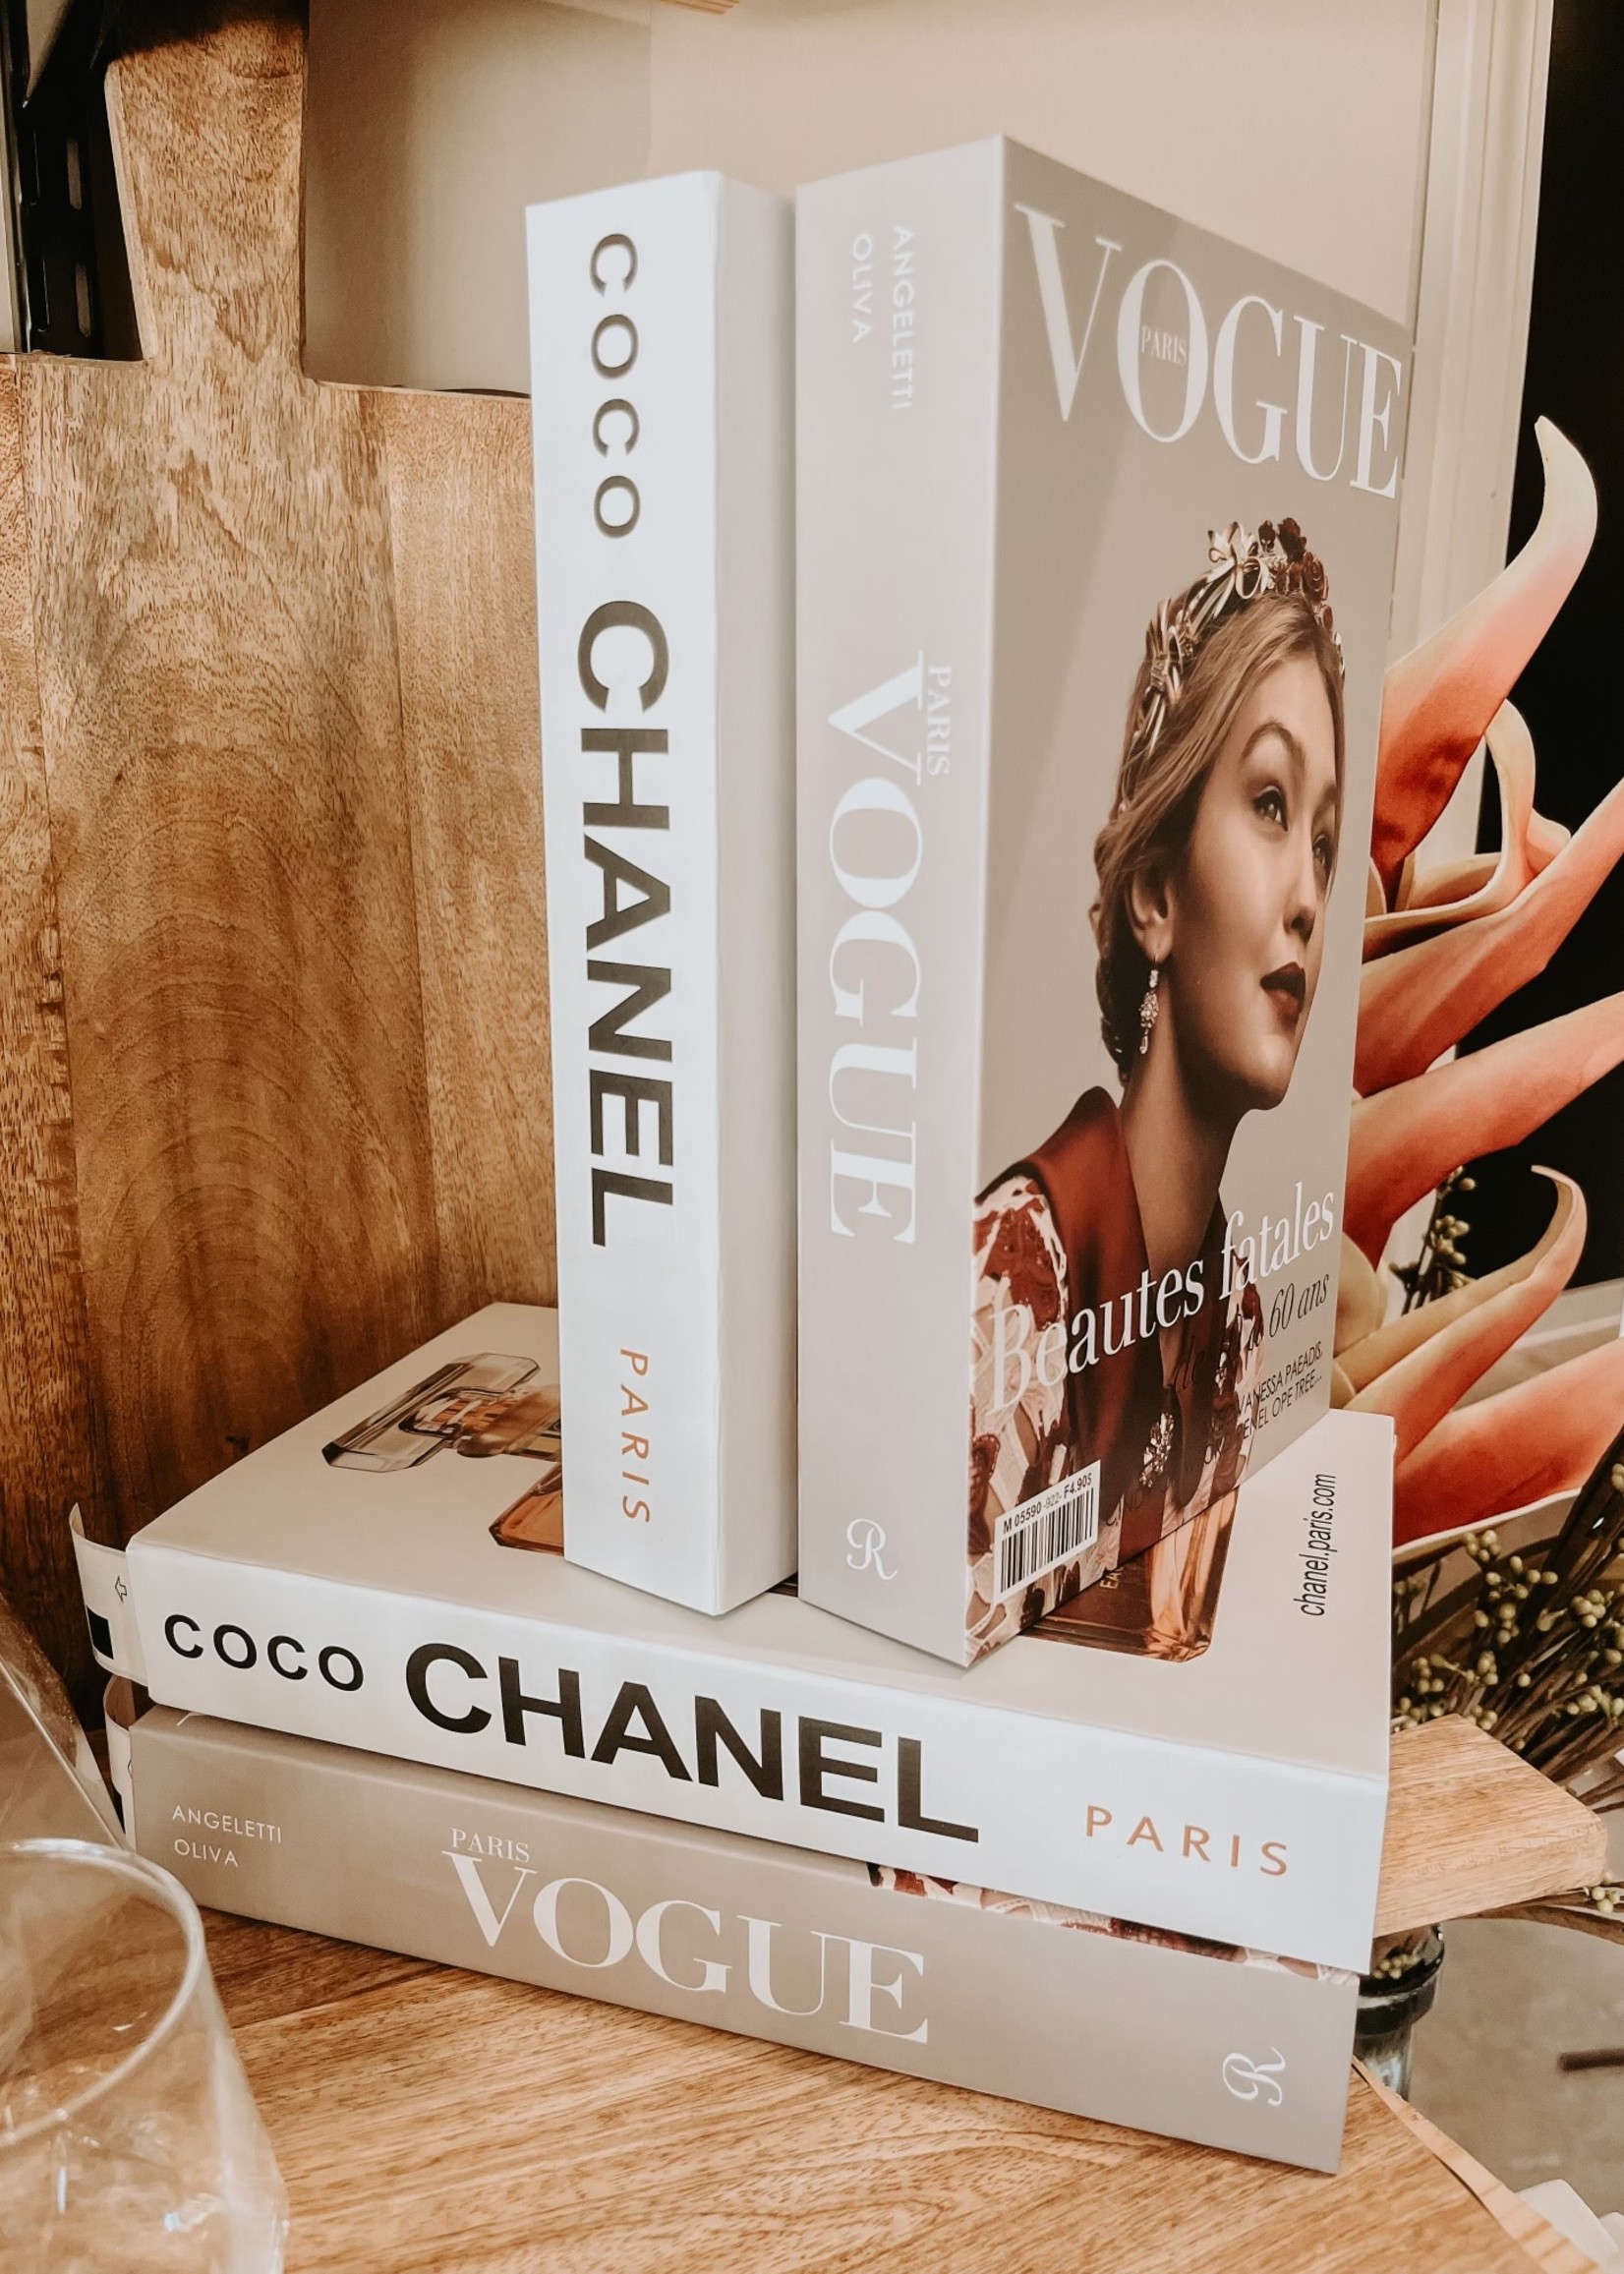 chanel table book